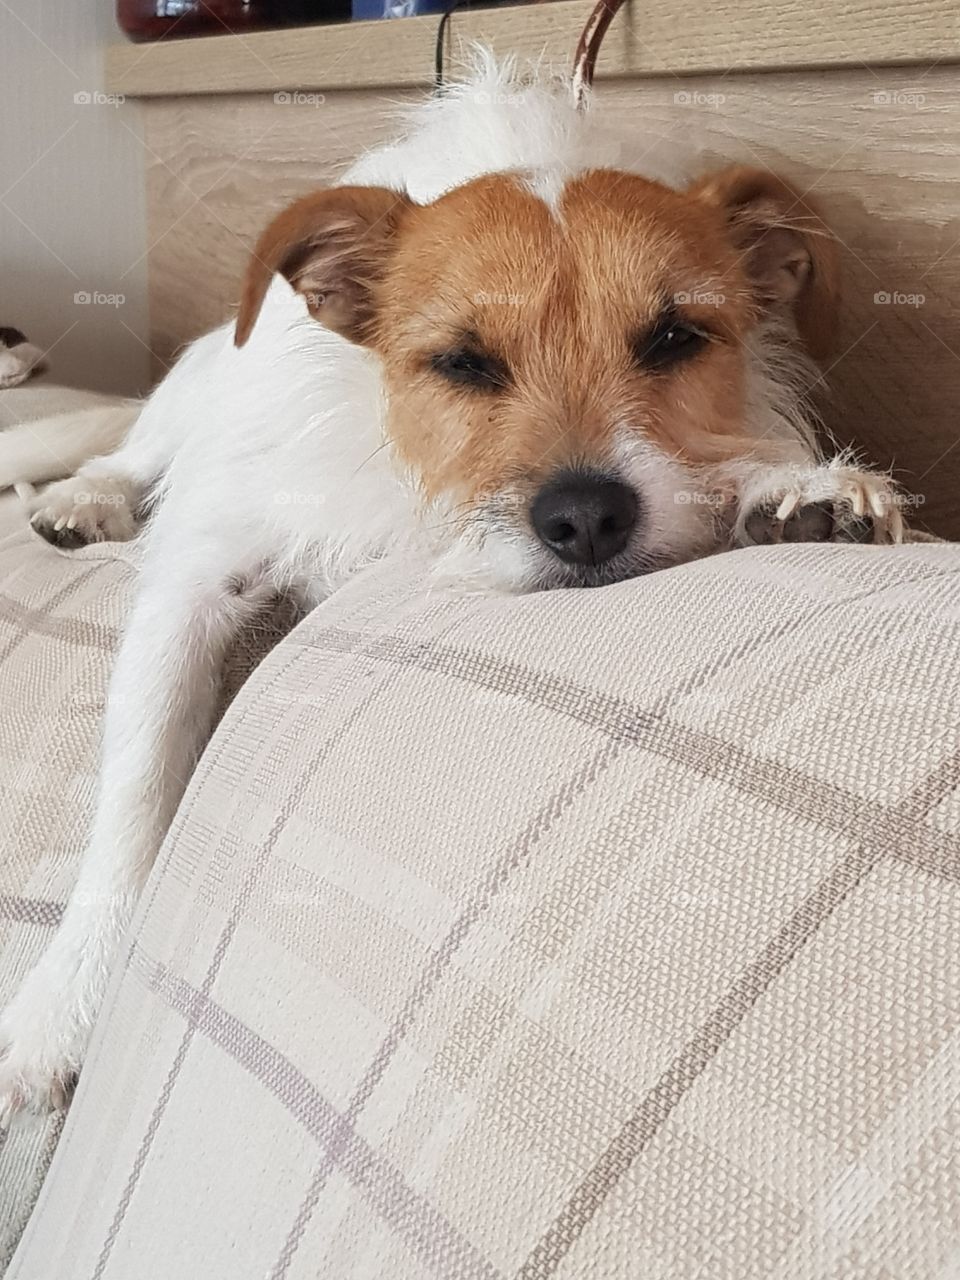 small terrier lazing on sofa